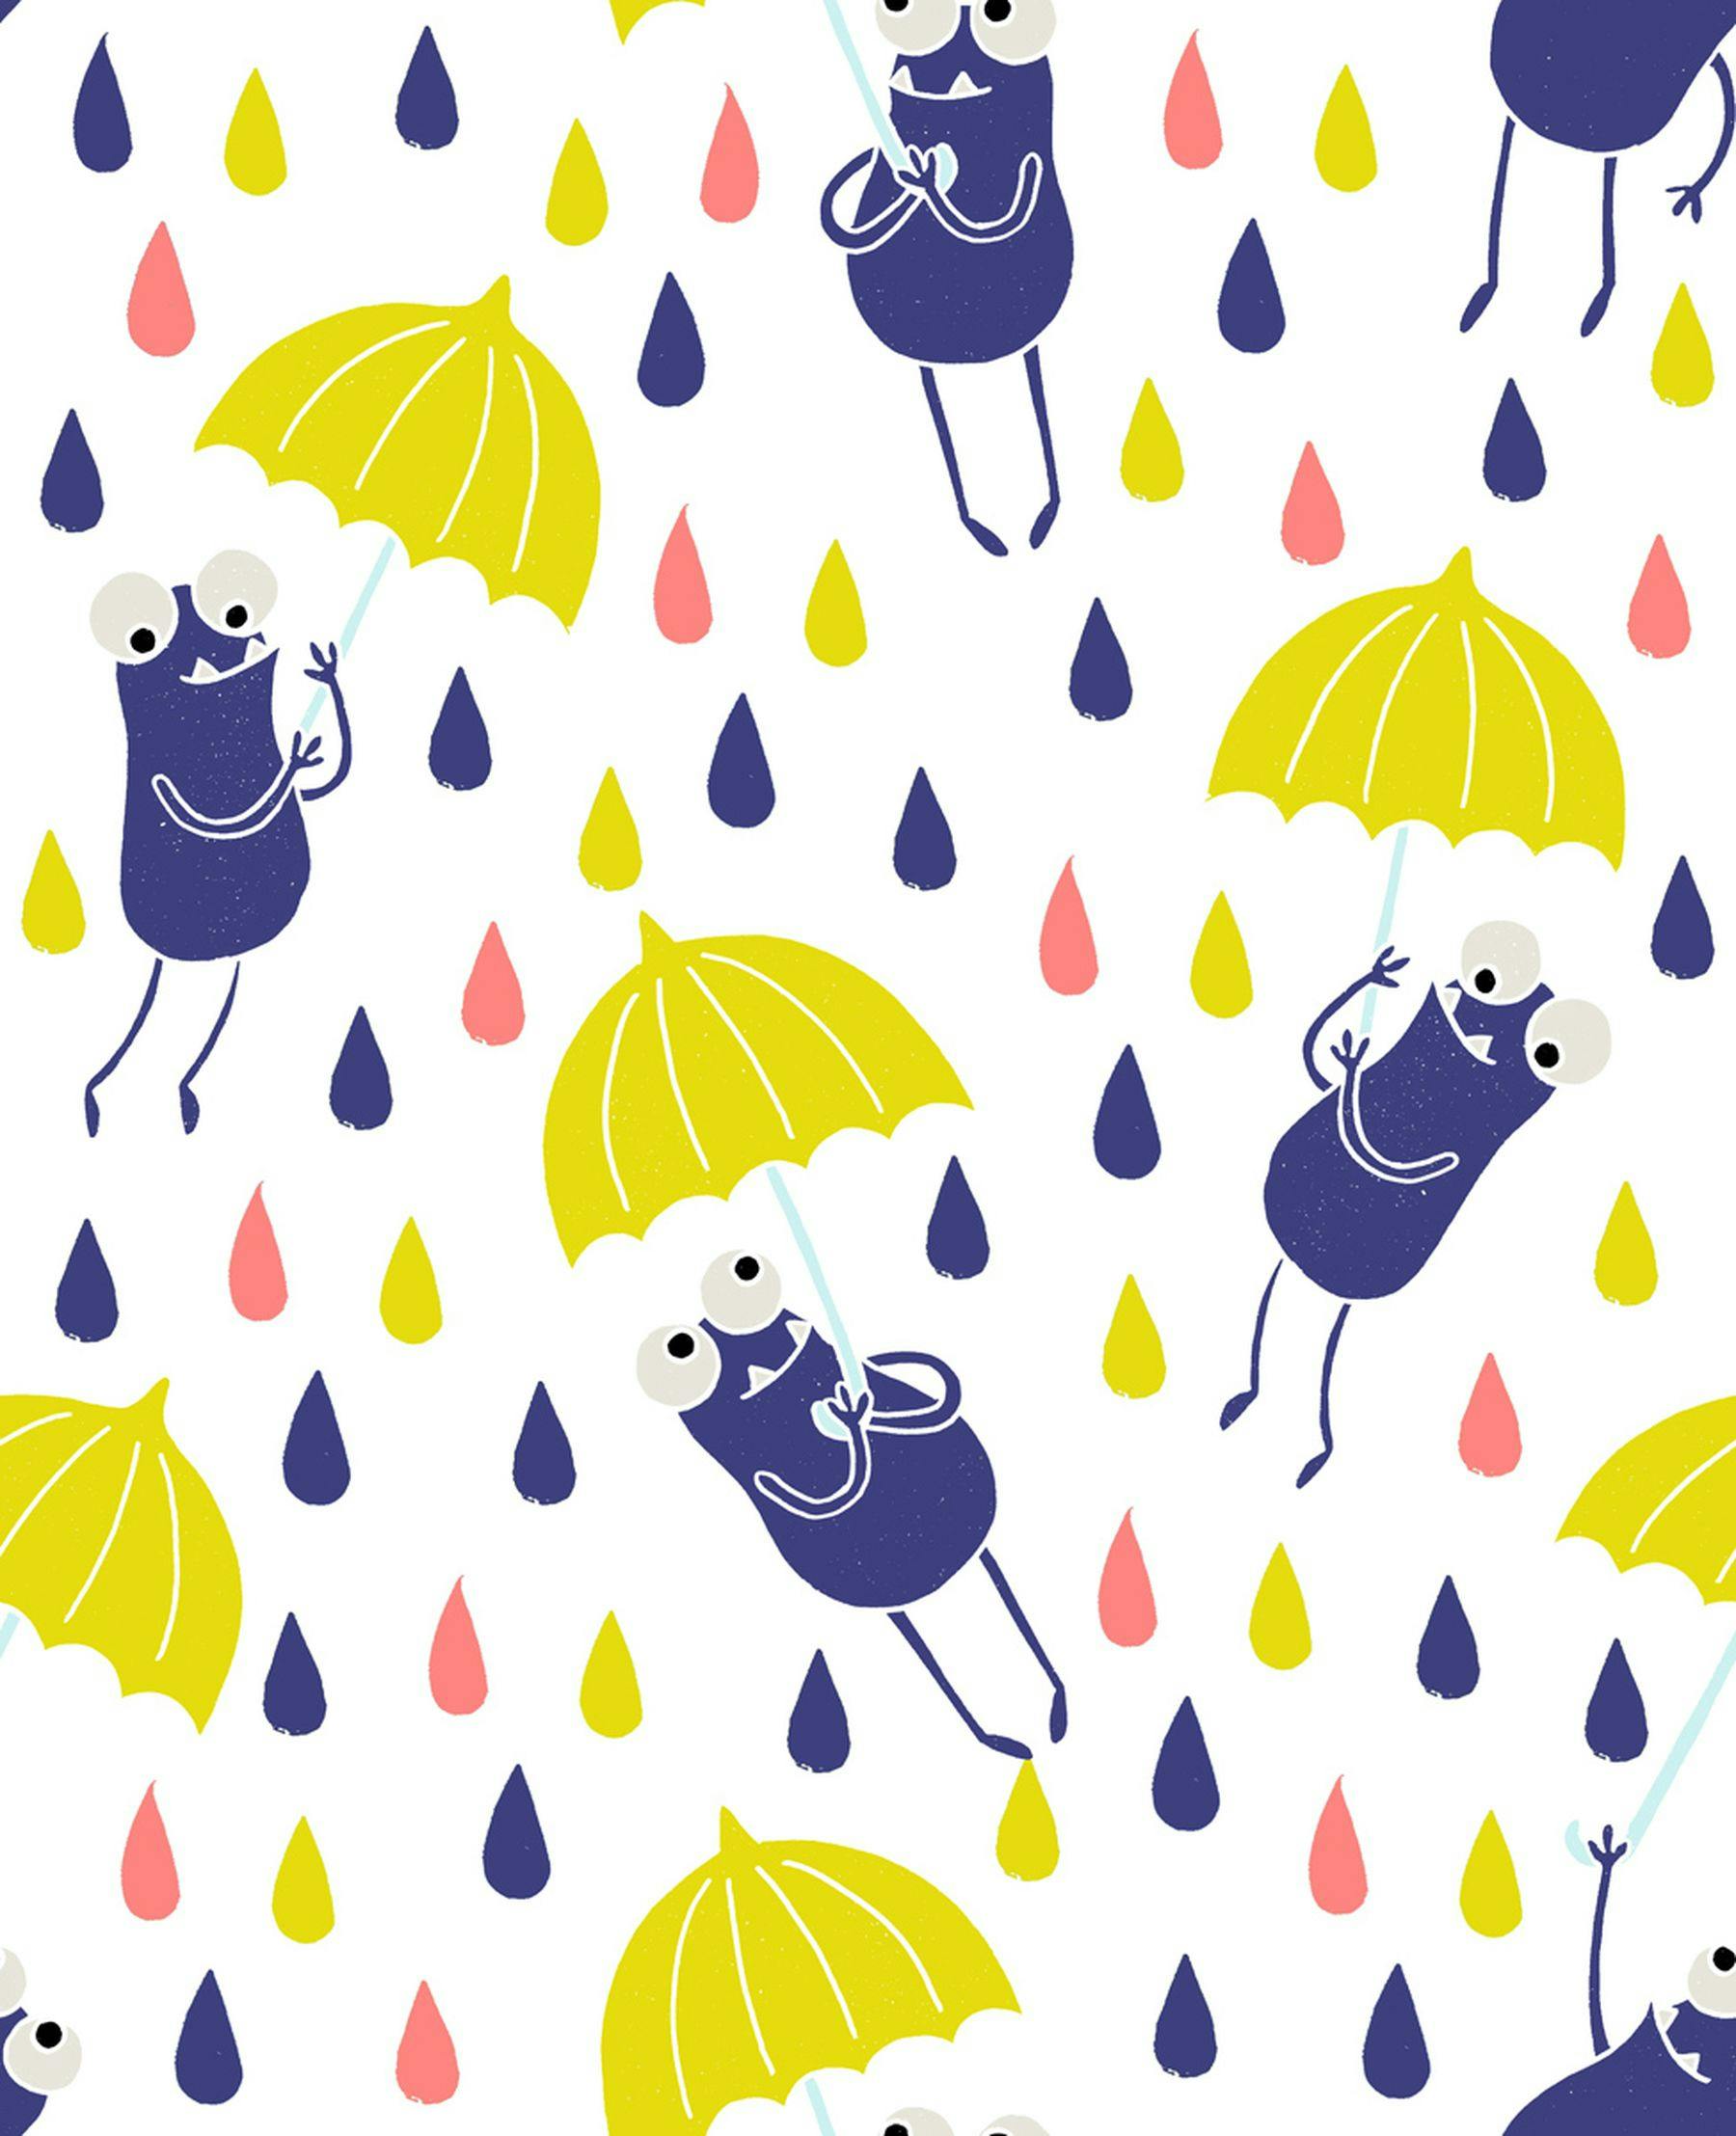 A digital illustration of a repeat pattern featuring purple cartoon frogs holding yellow umbrellas. Raindrop shapes cascade down in pink, yellow and purple.